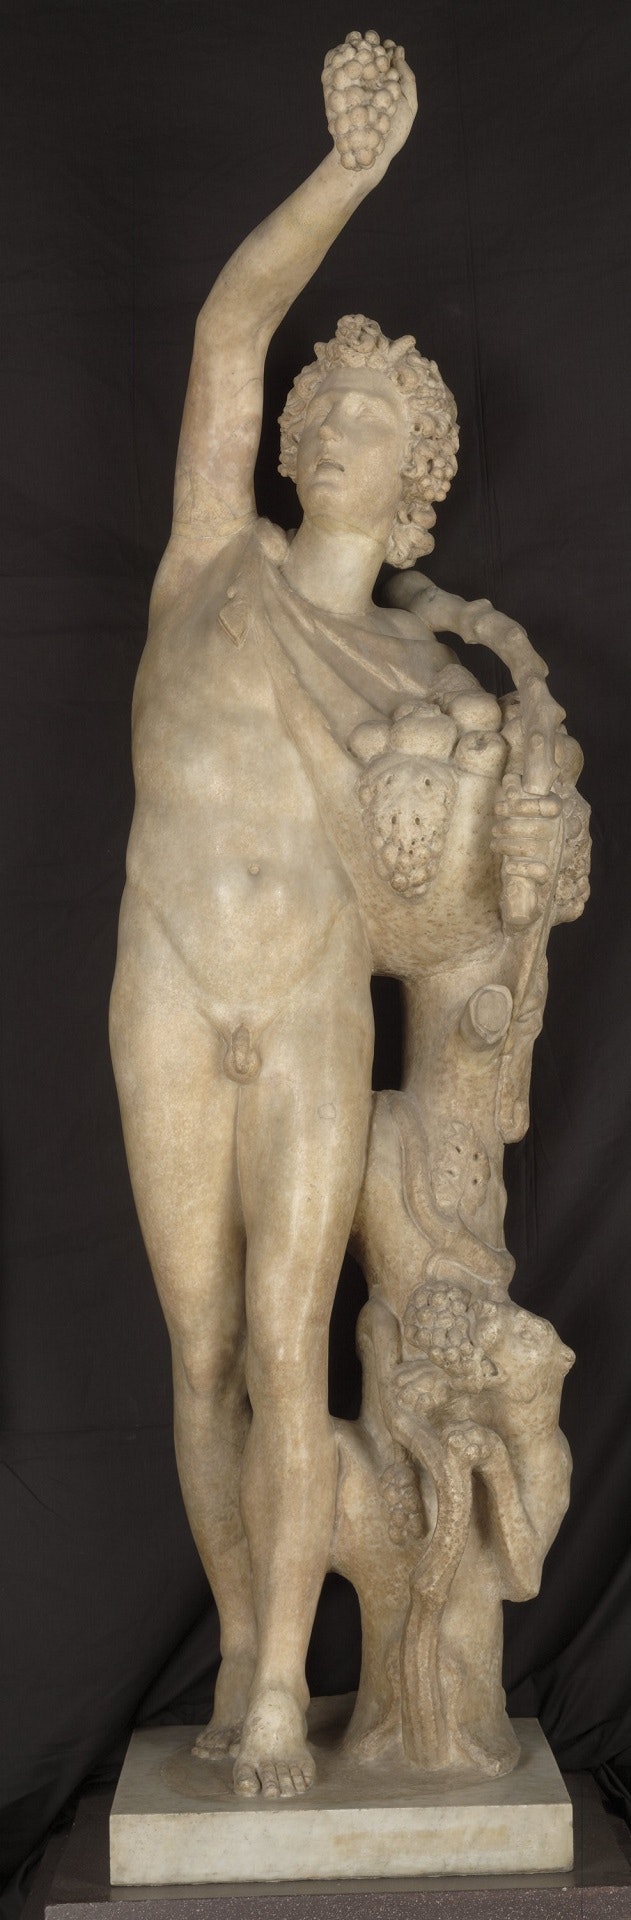 Satyr with grapes